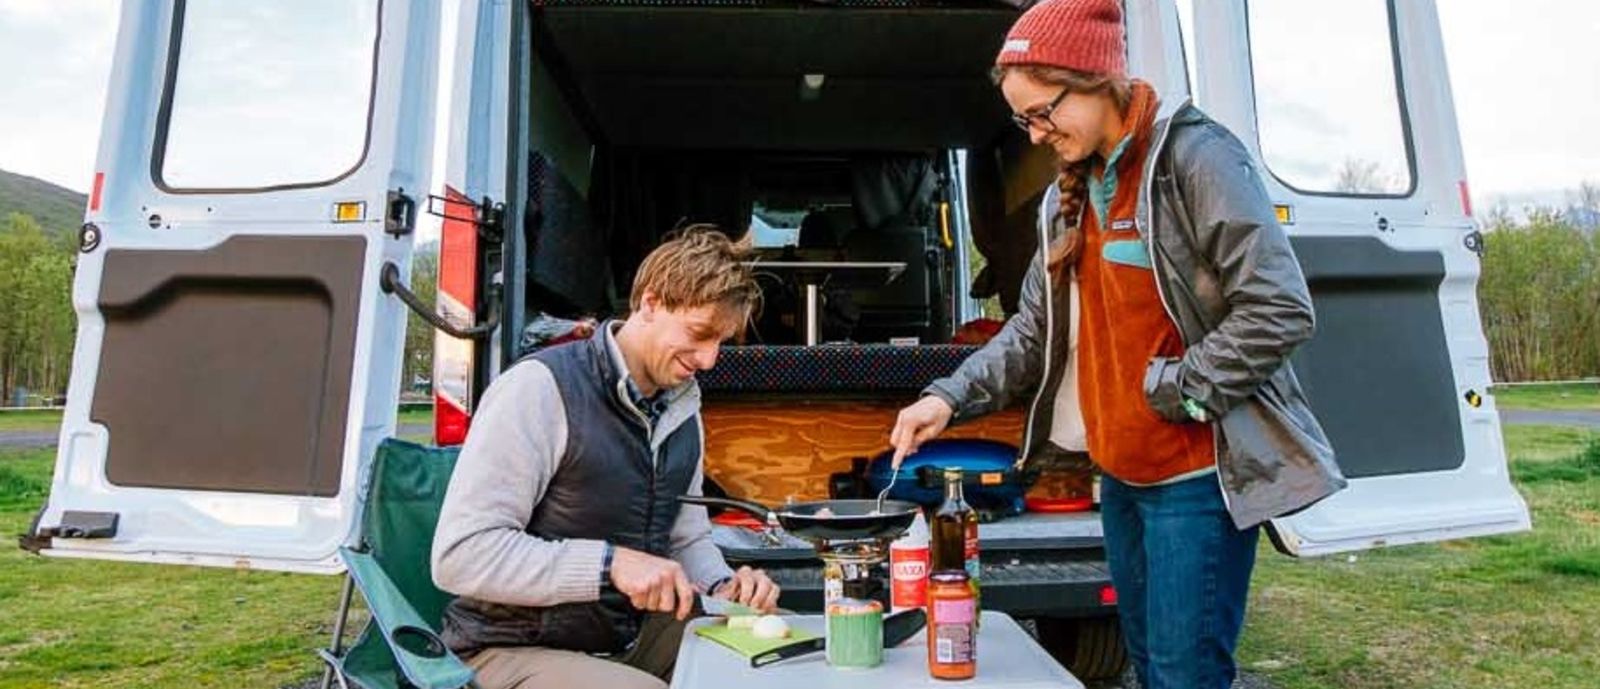 https://www.gorving.com/sites/default/files/styles/hero_bg_image/public/2020-09/10%20Tips%20For%20Cooking%20In%20An%20RV.jpg?h=70dabf35&itok=Svy0za0D